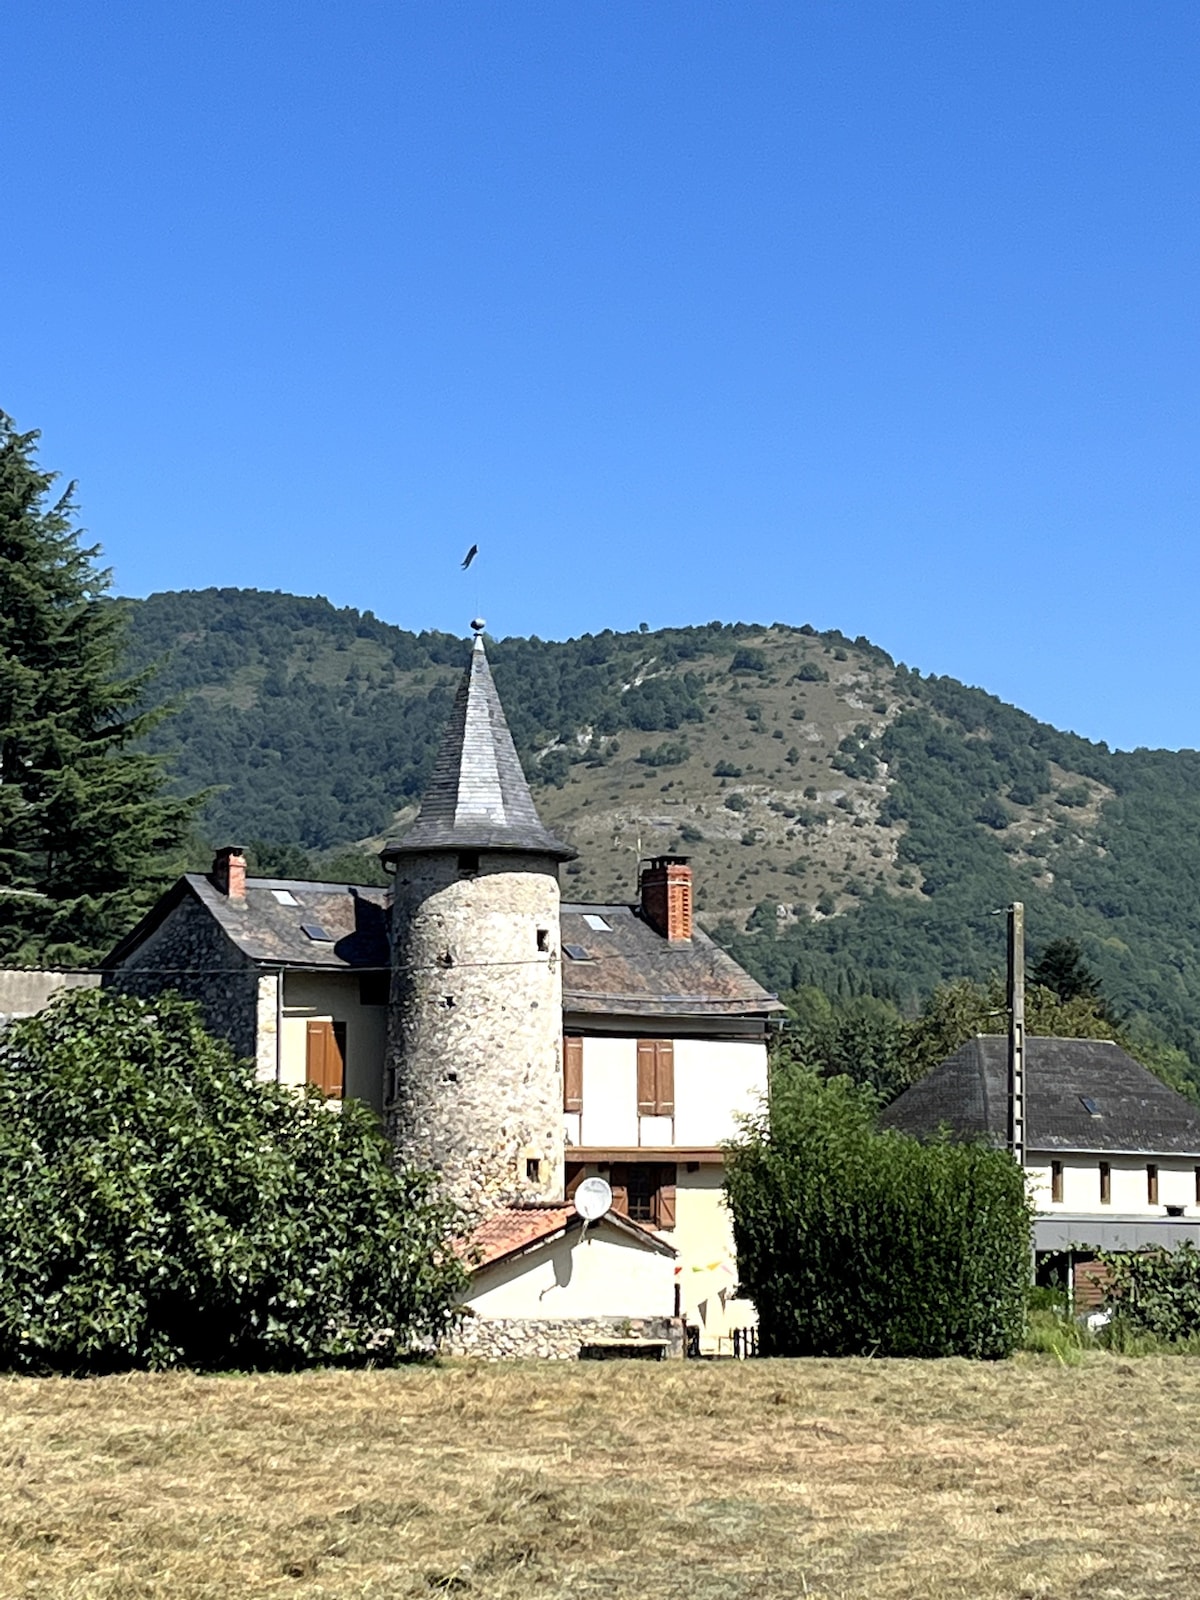 Charming 17th-century farmhouse with tower